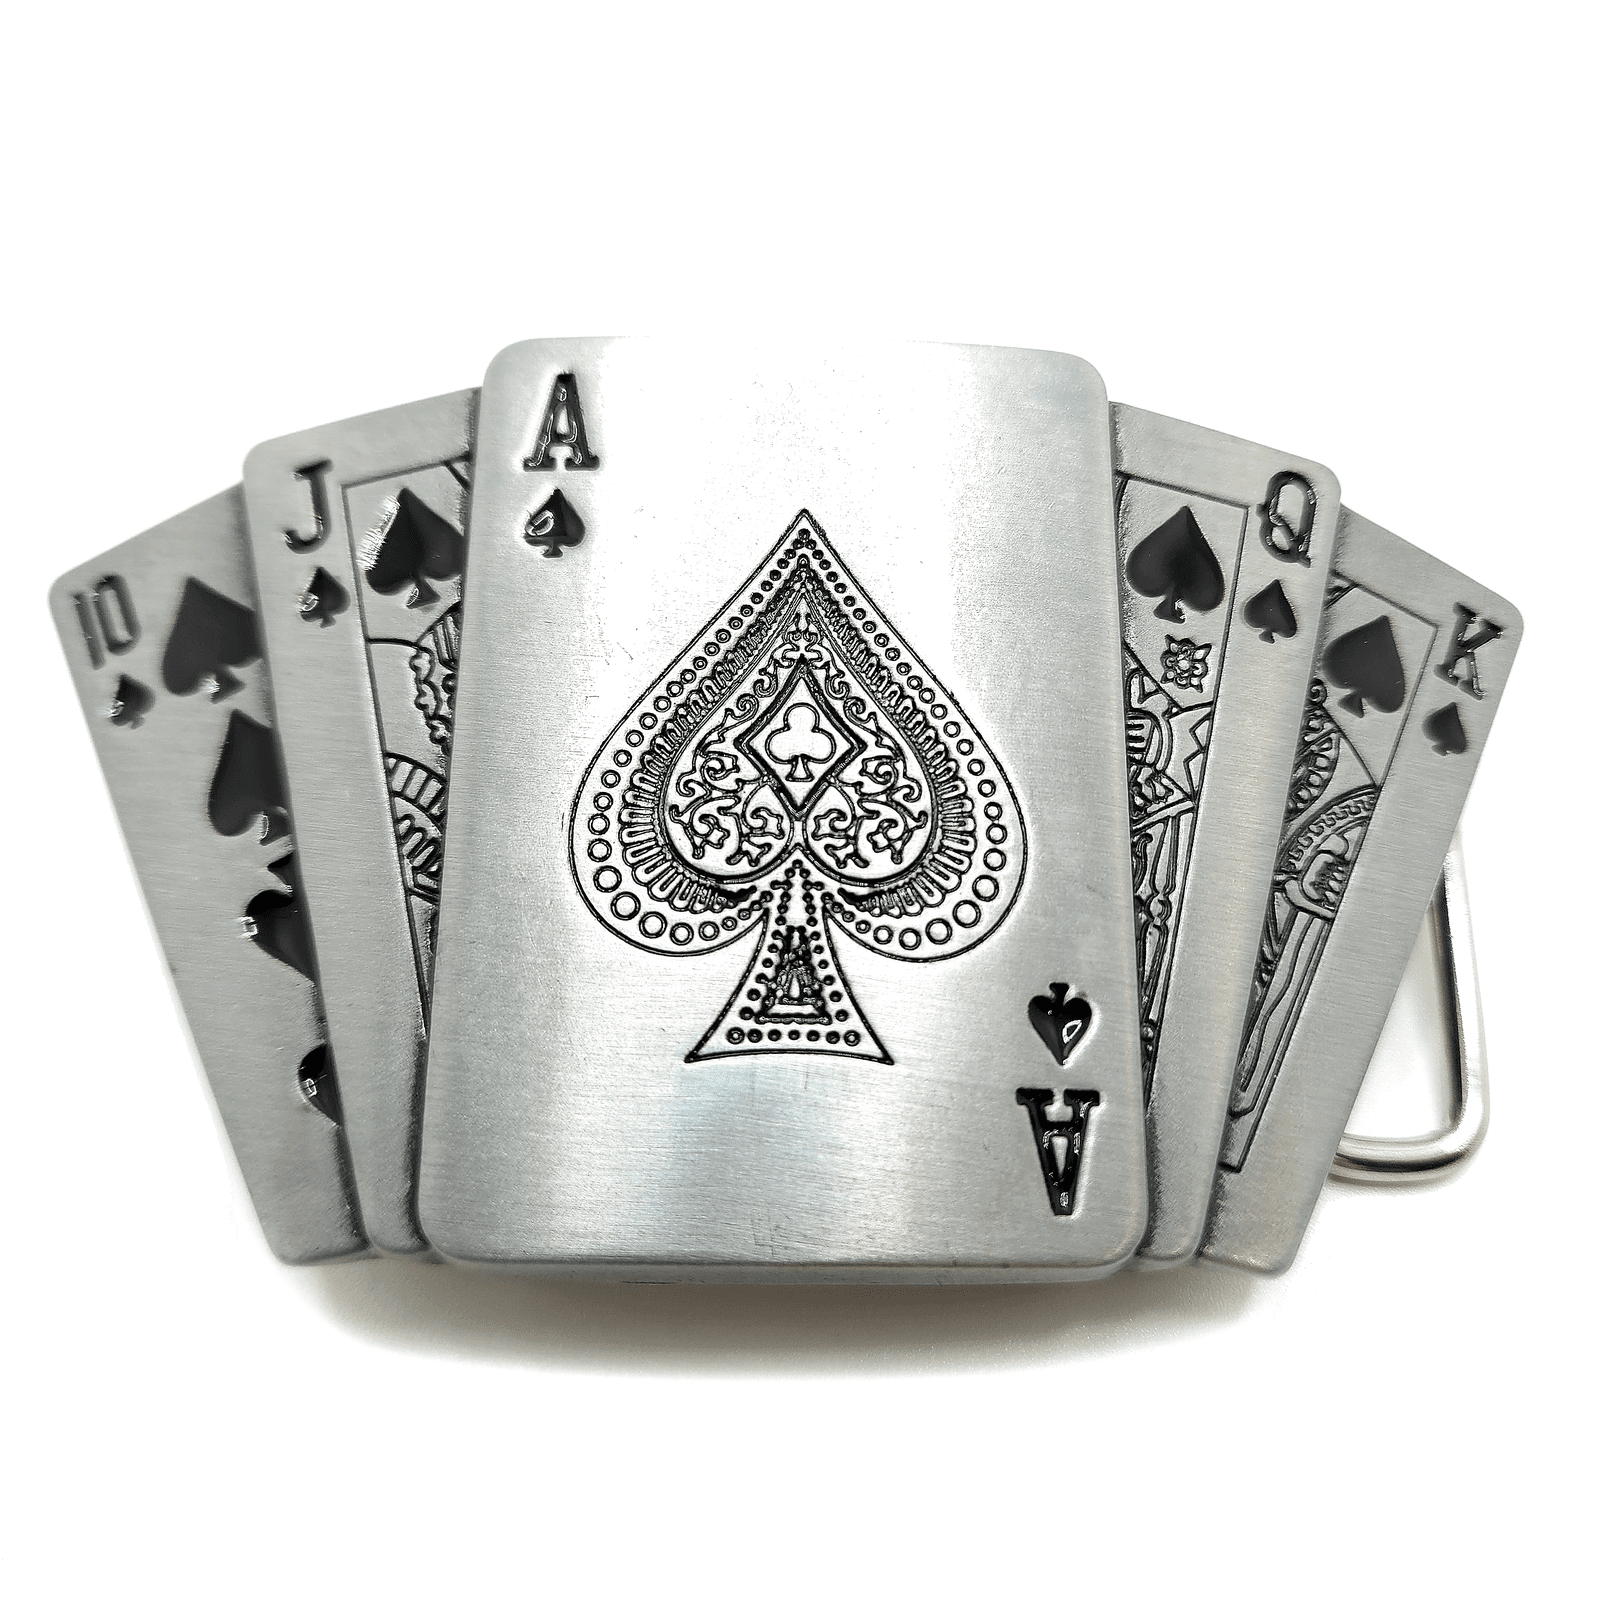 Men's Fashionable Playing Card Buckle Belt